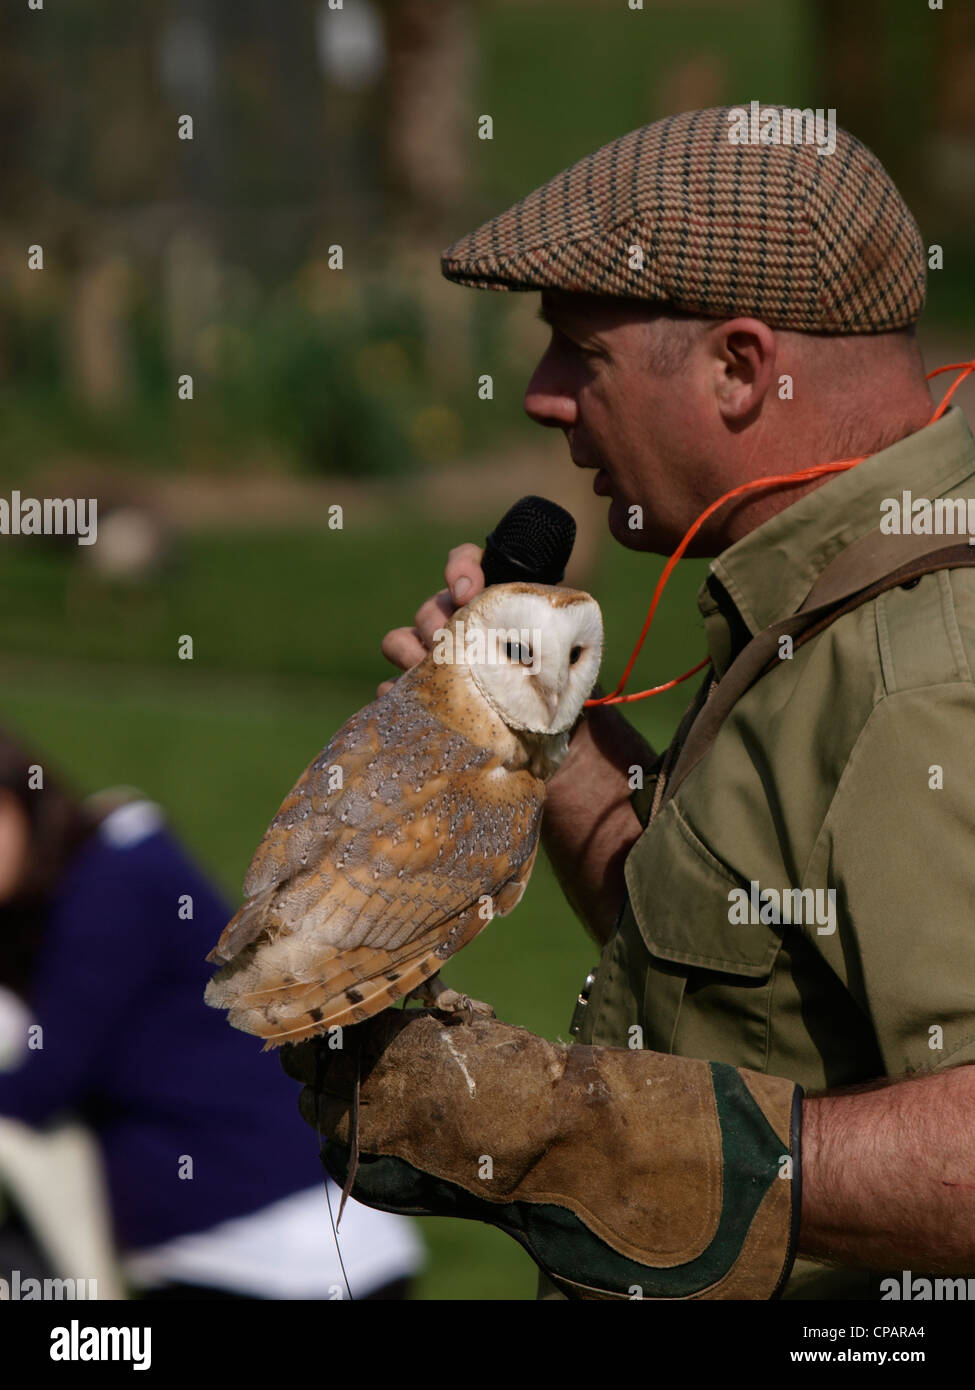 David Buncle of Westcountry Falconry giving a display with a Barn Owl, Tyto alba, UK Stock Photo